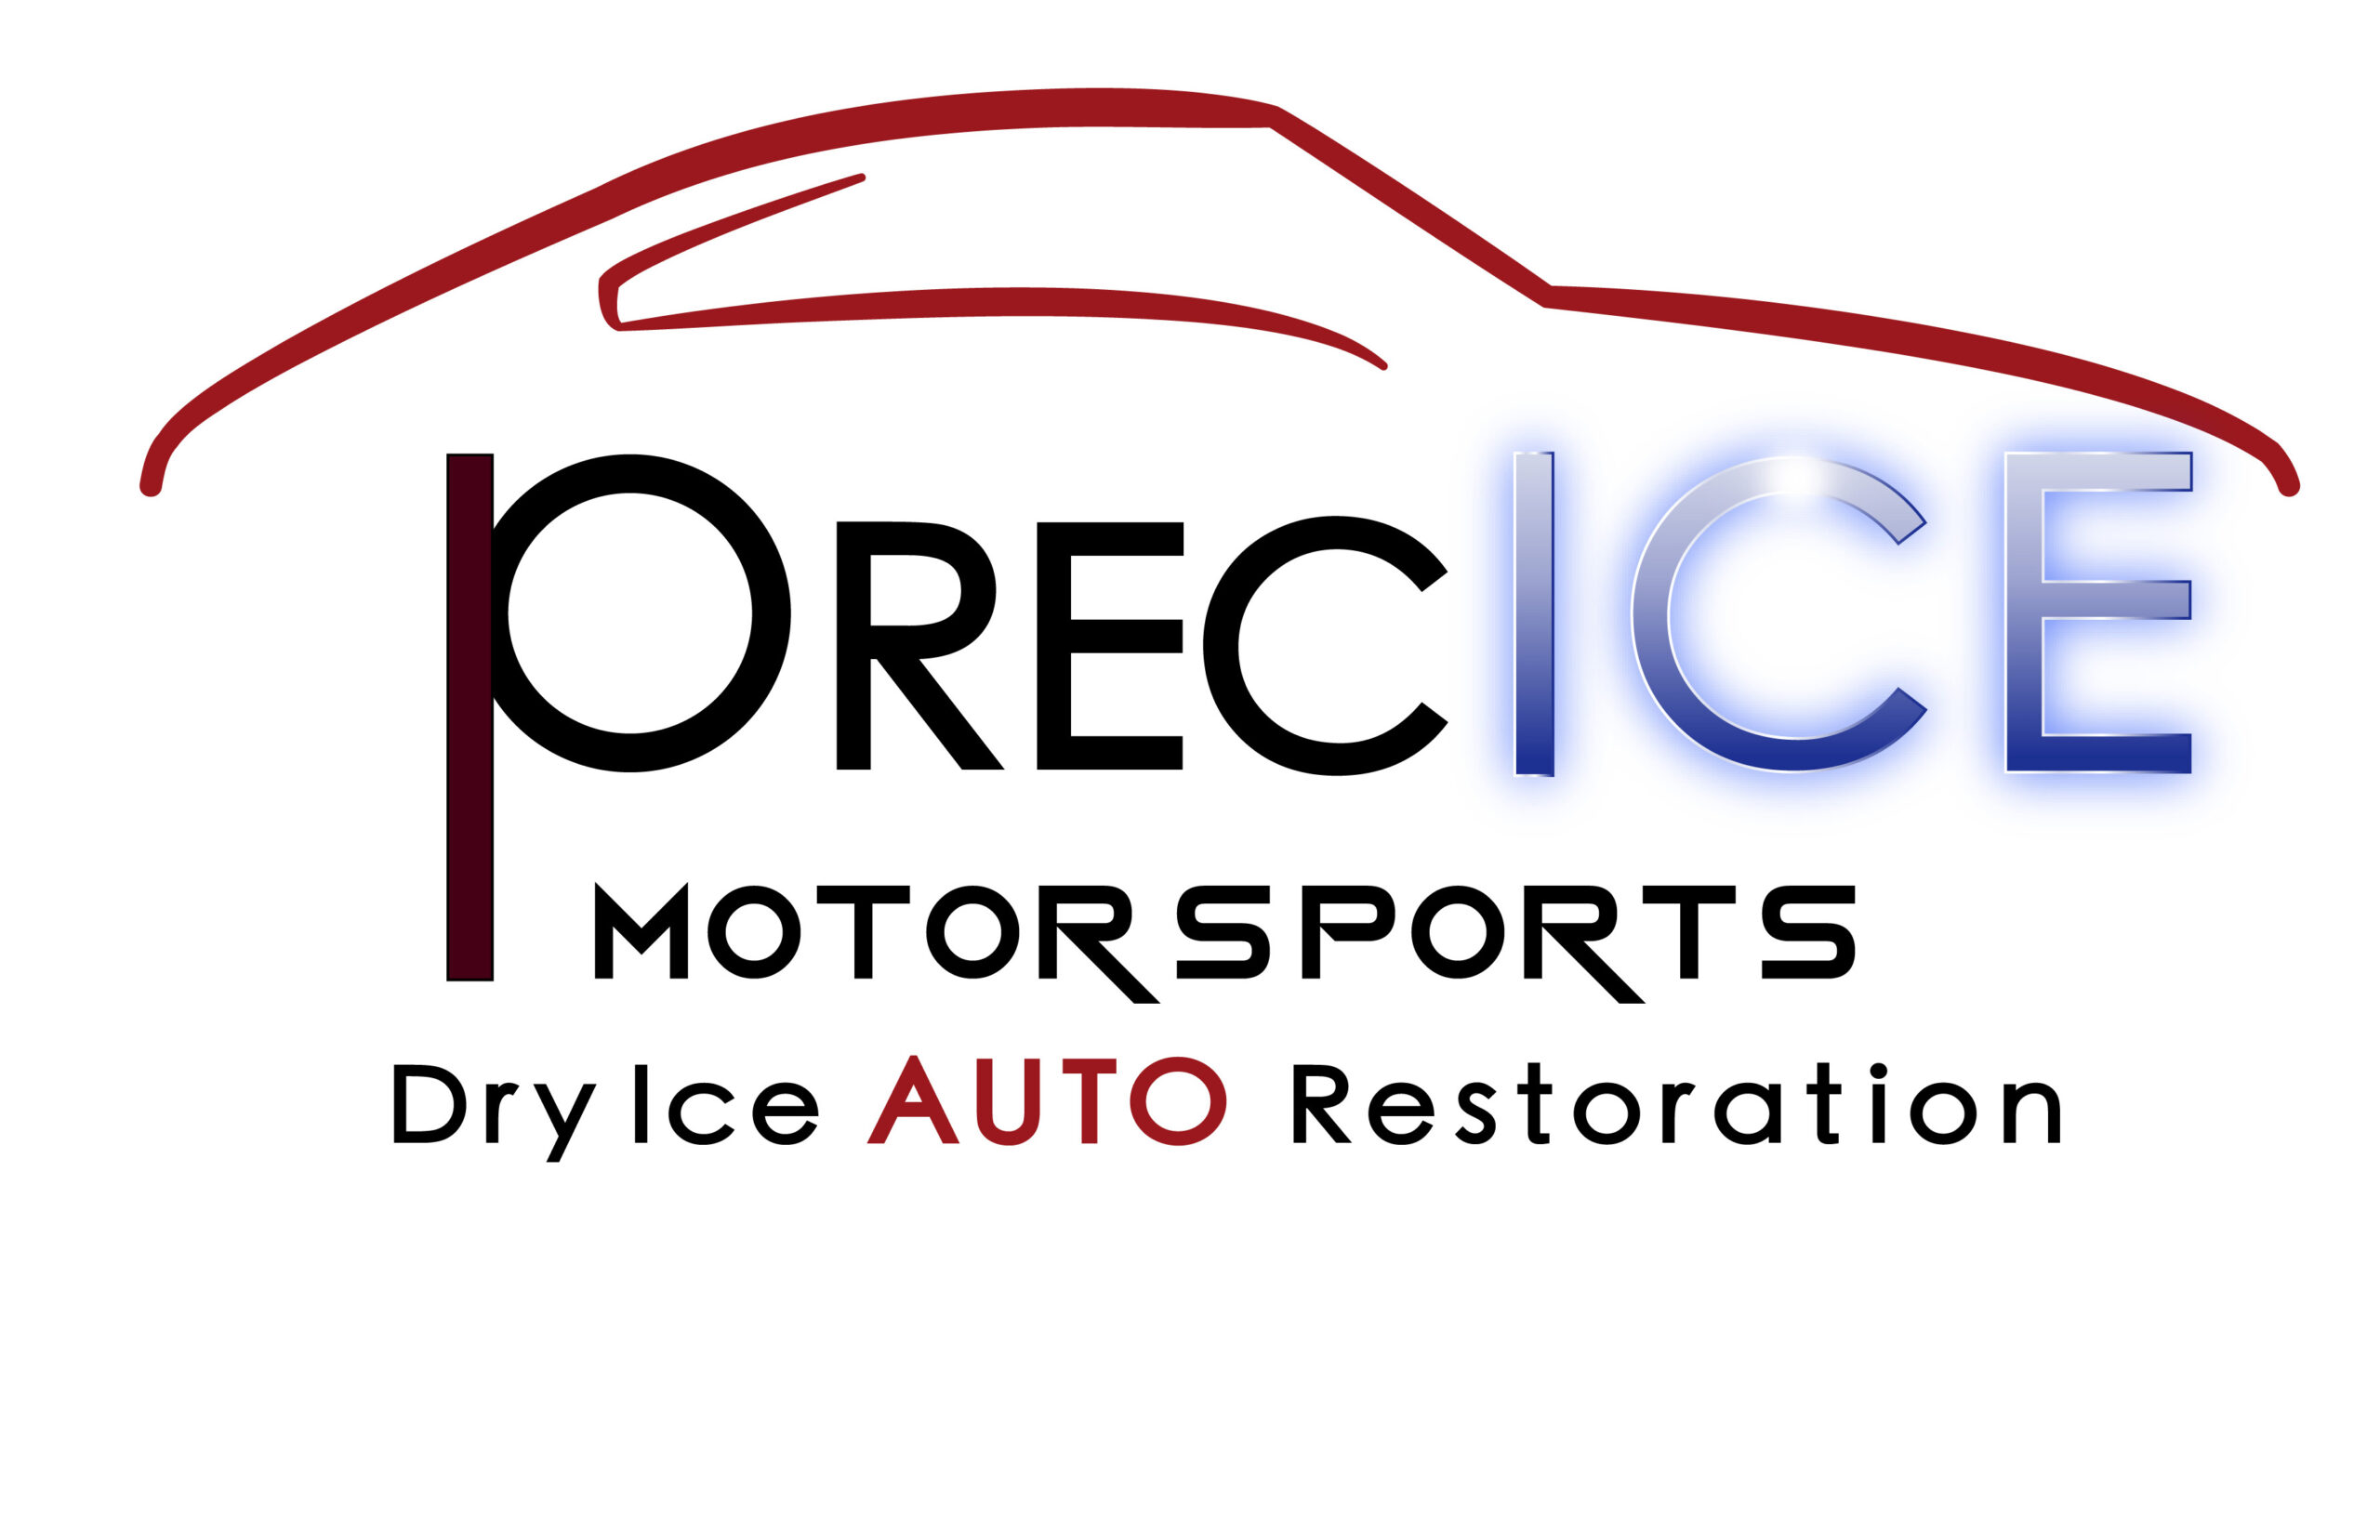 Front Image Of Prec Ice Motor Sports Card